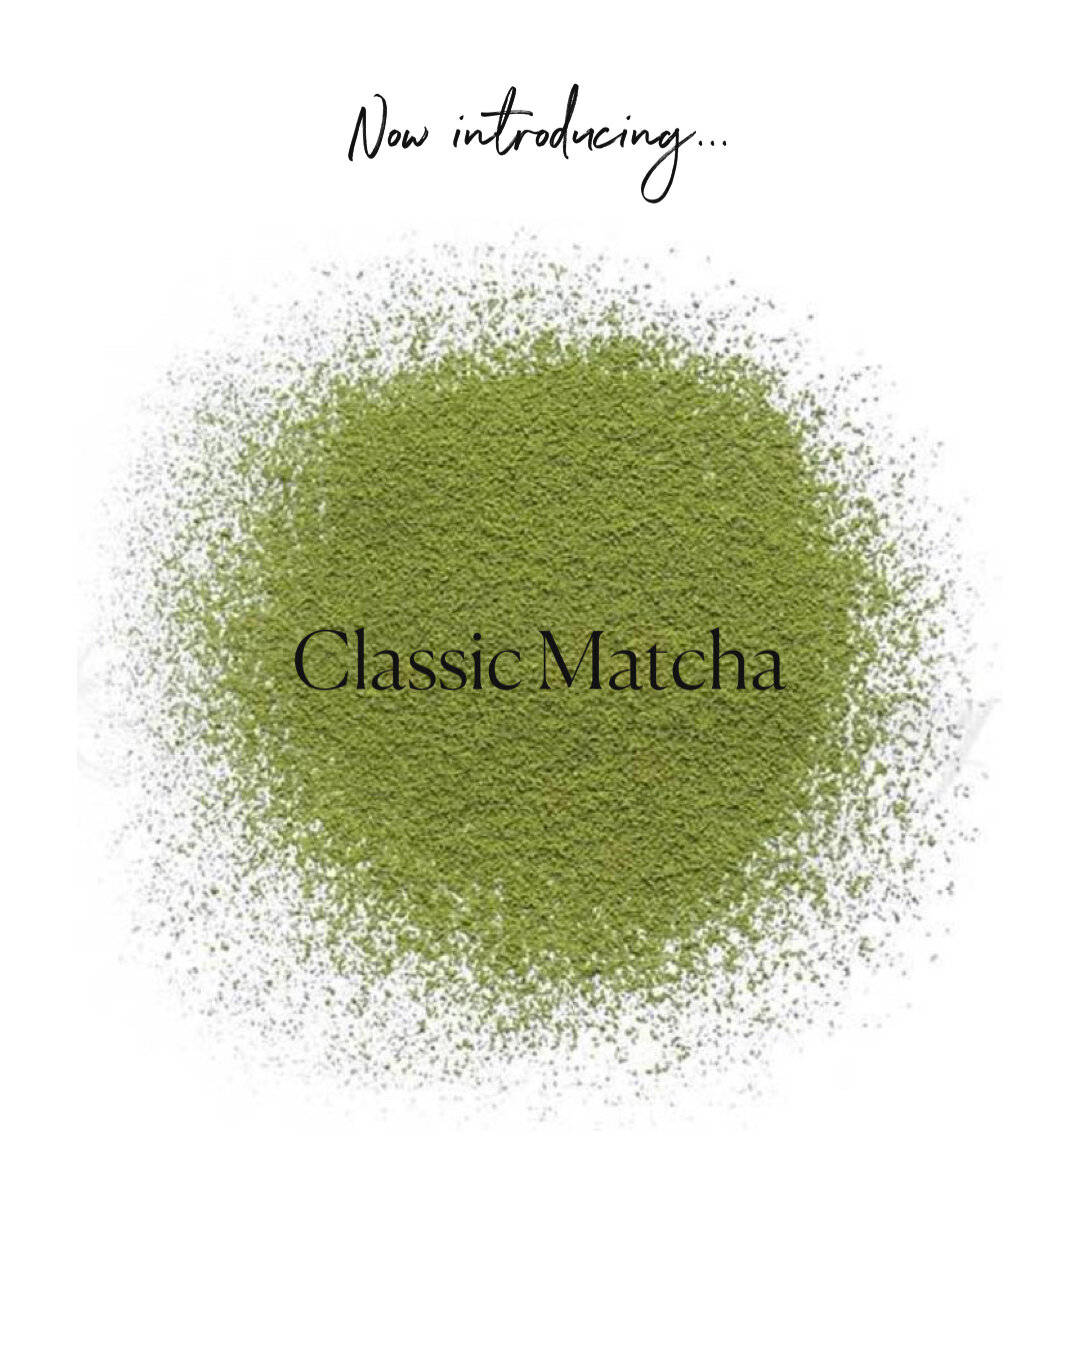 The time is now! Just launched our first three matchas 💚 Classic matcha, chai matcha, blueberry matcha&mdash; they&rsquo;re ready to be added to your morning and/or midday routine! 

www.bighandsometea.com

#matchatea #dallastea #planotea #dfwtea #o